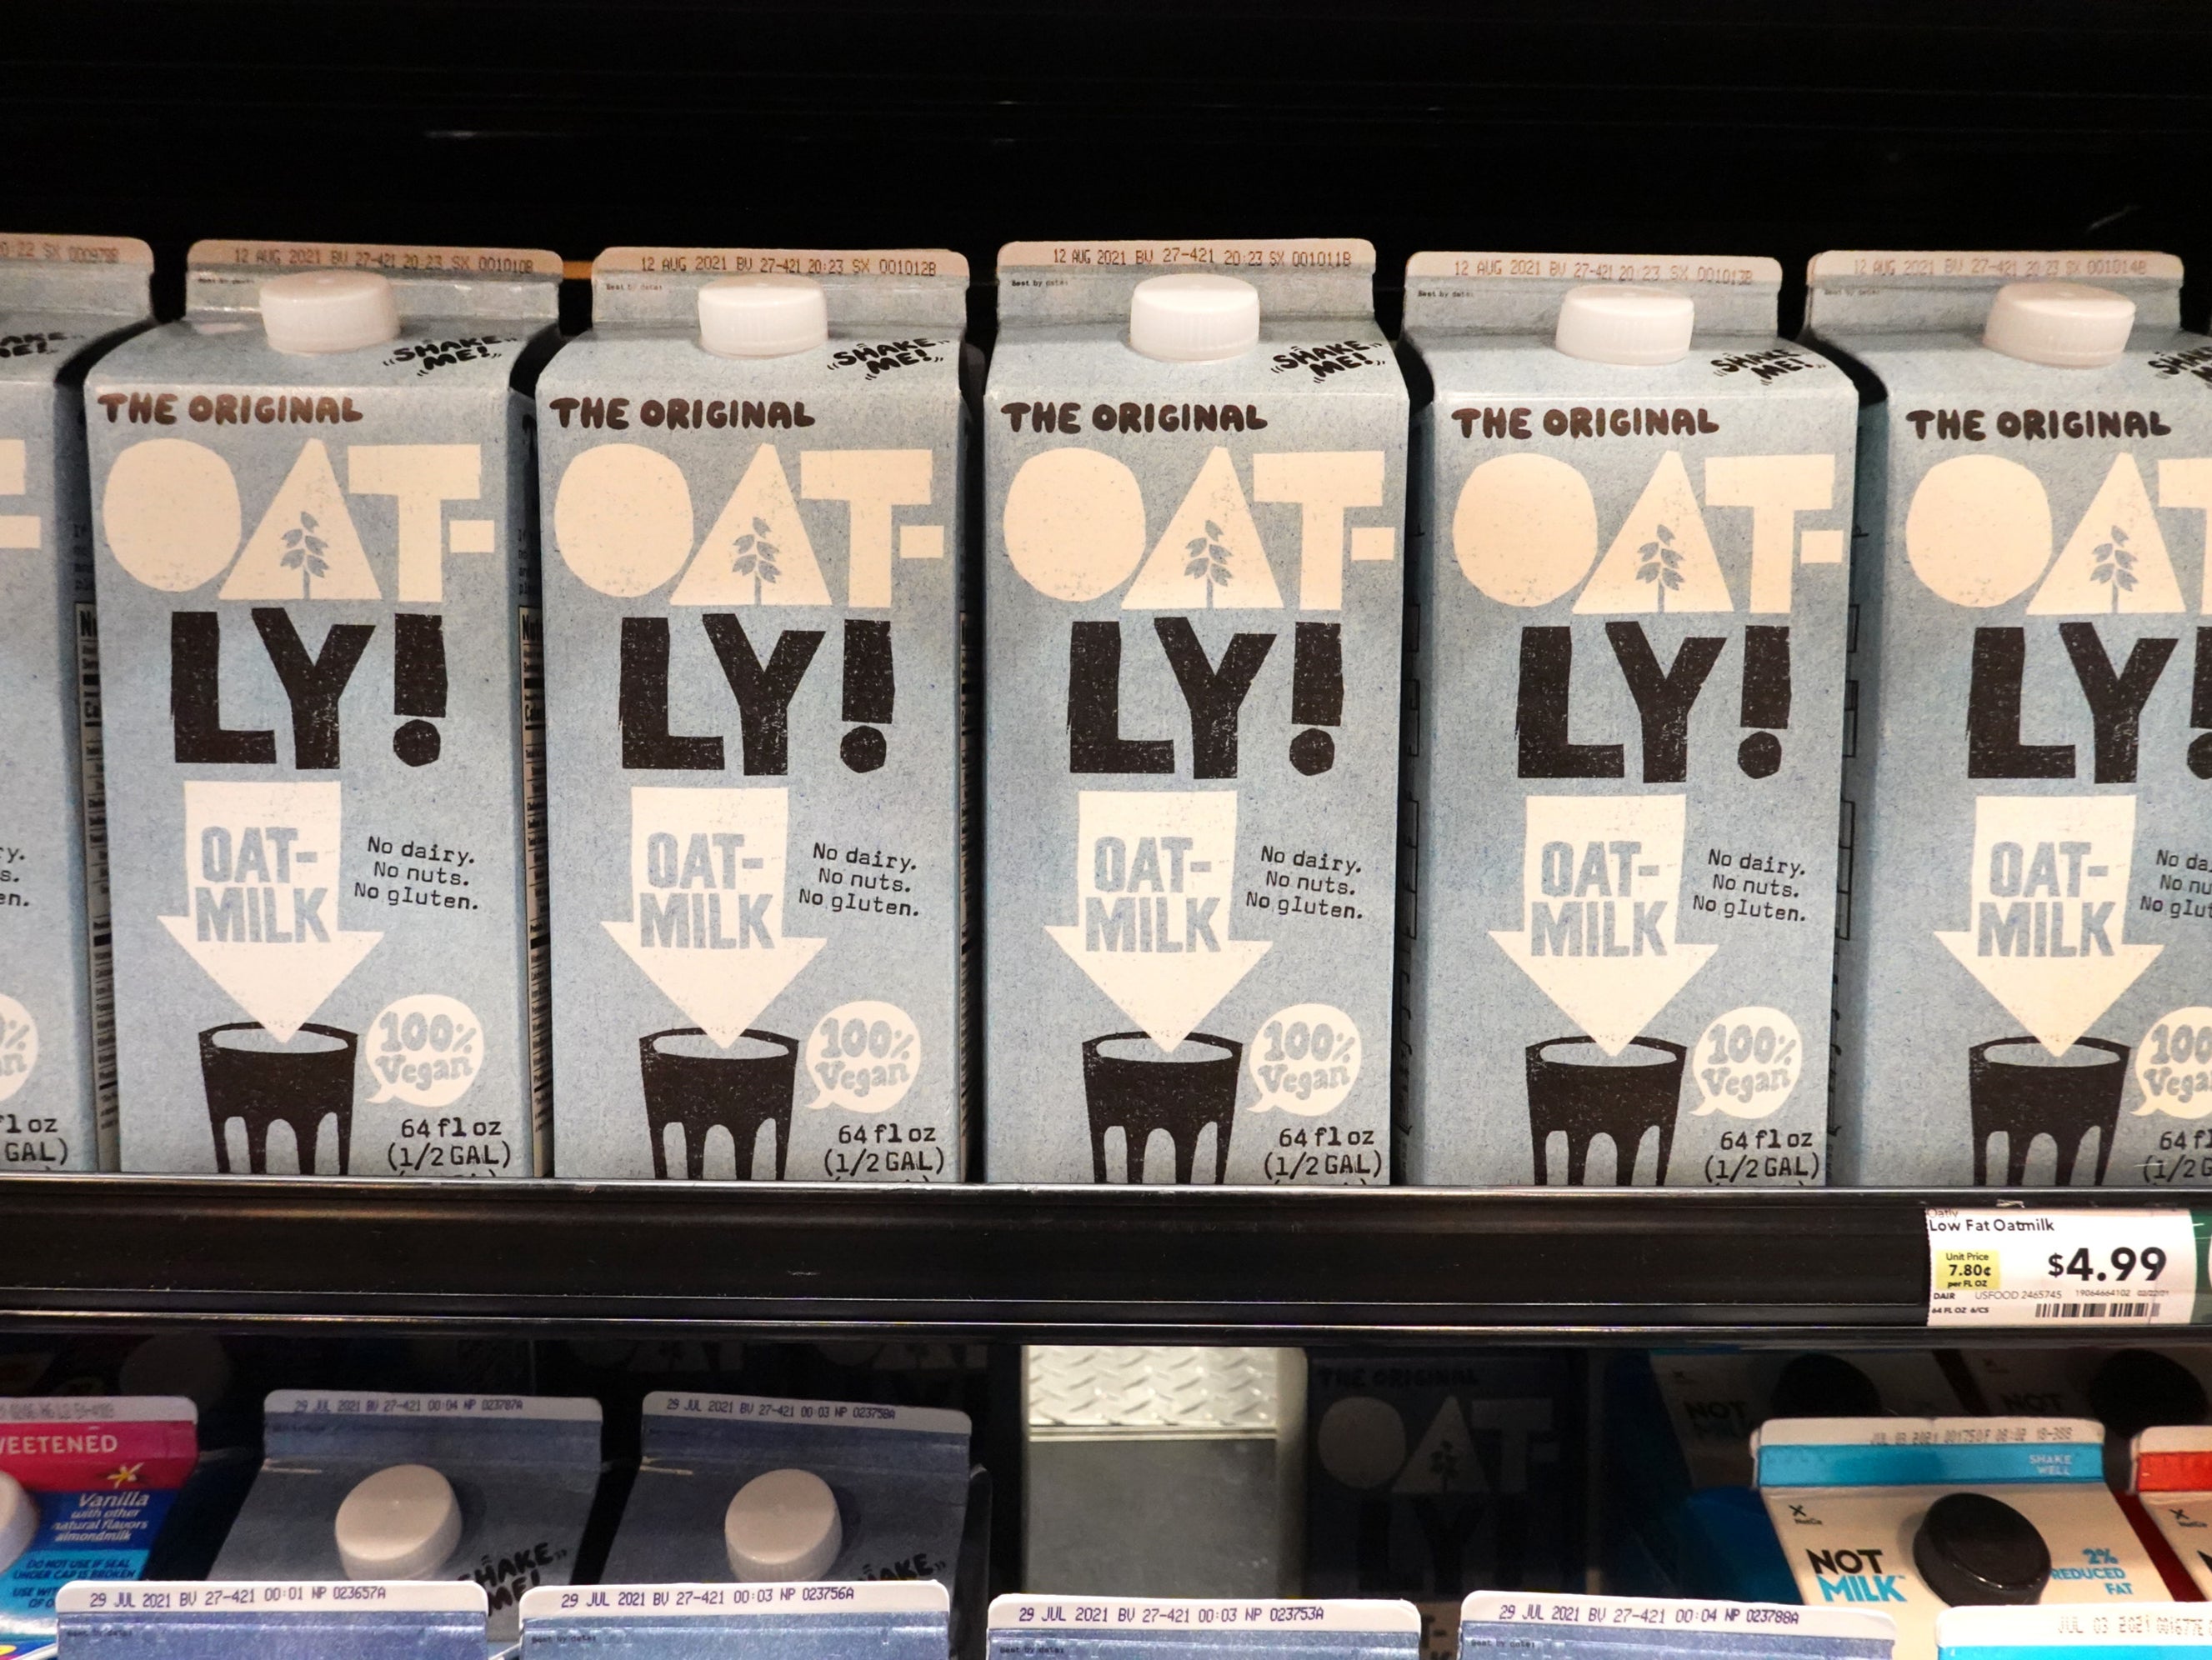 Oatly is a plant-based milk substitute